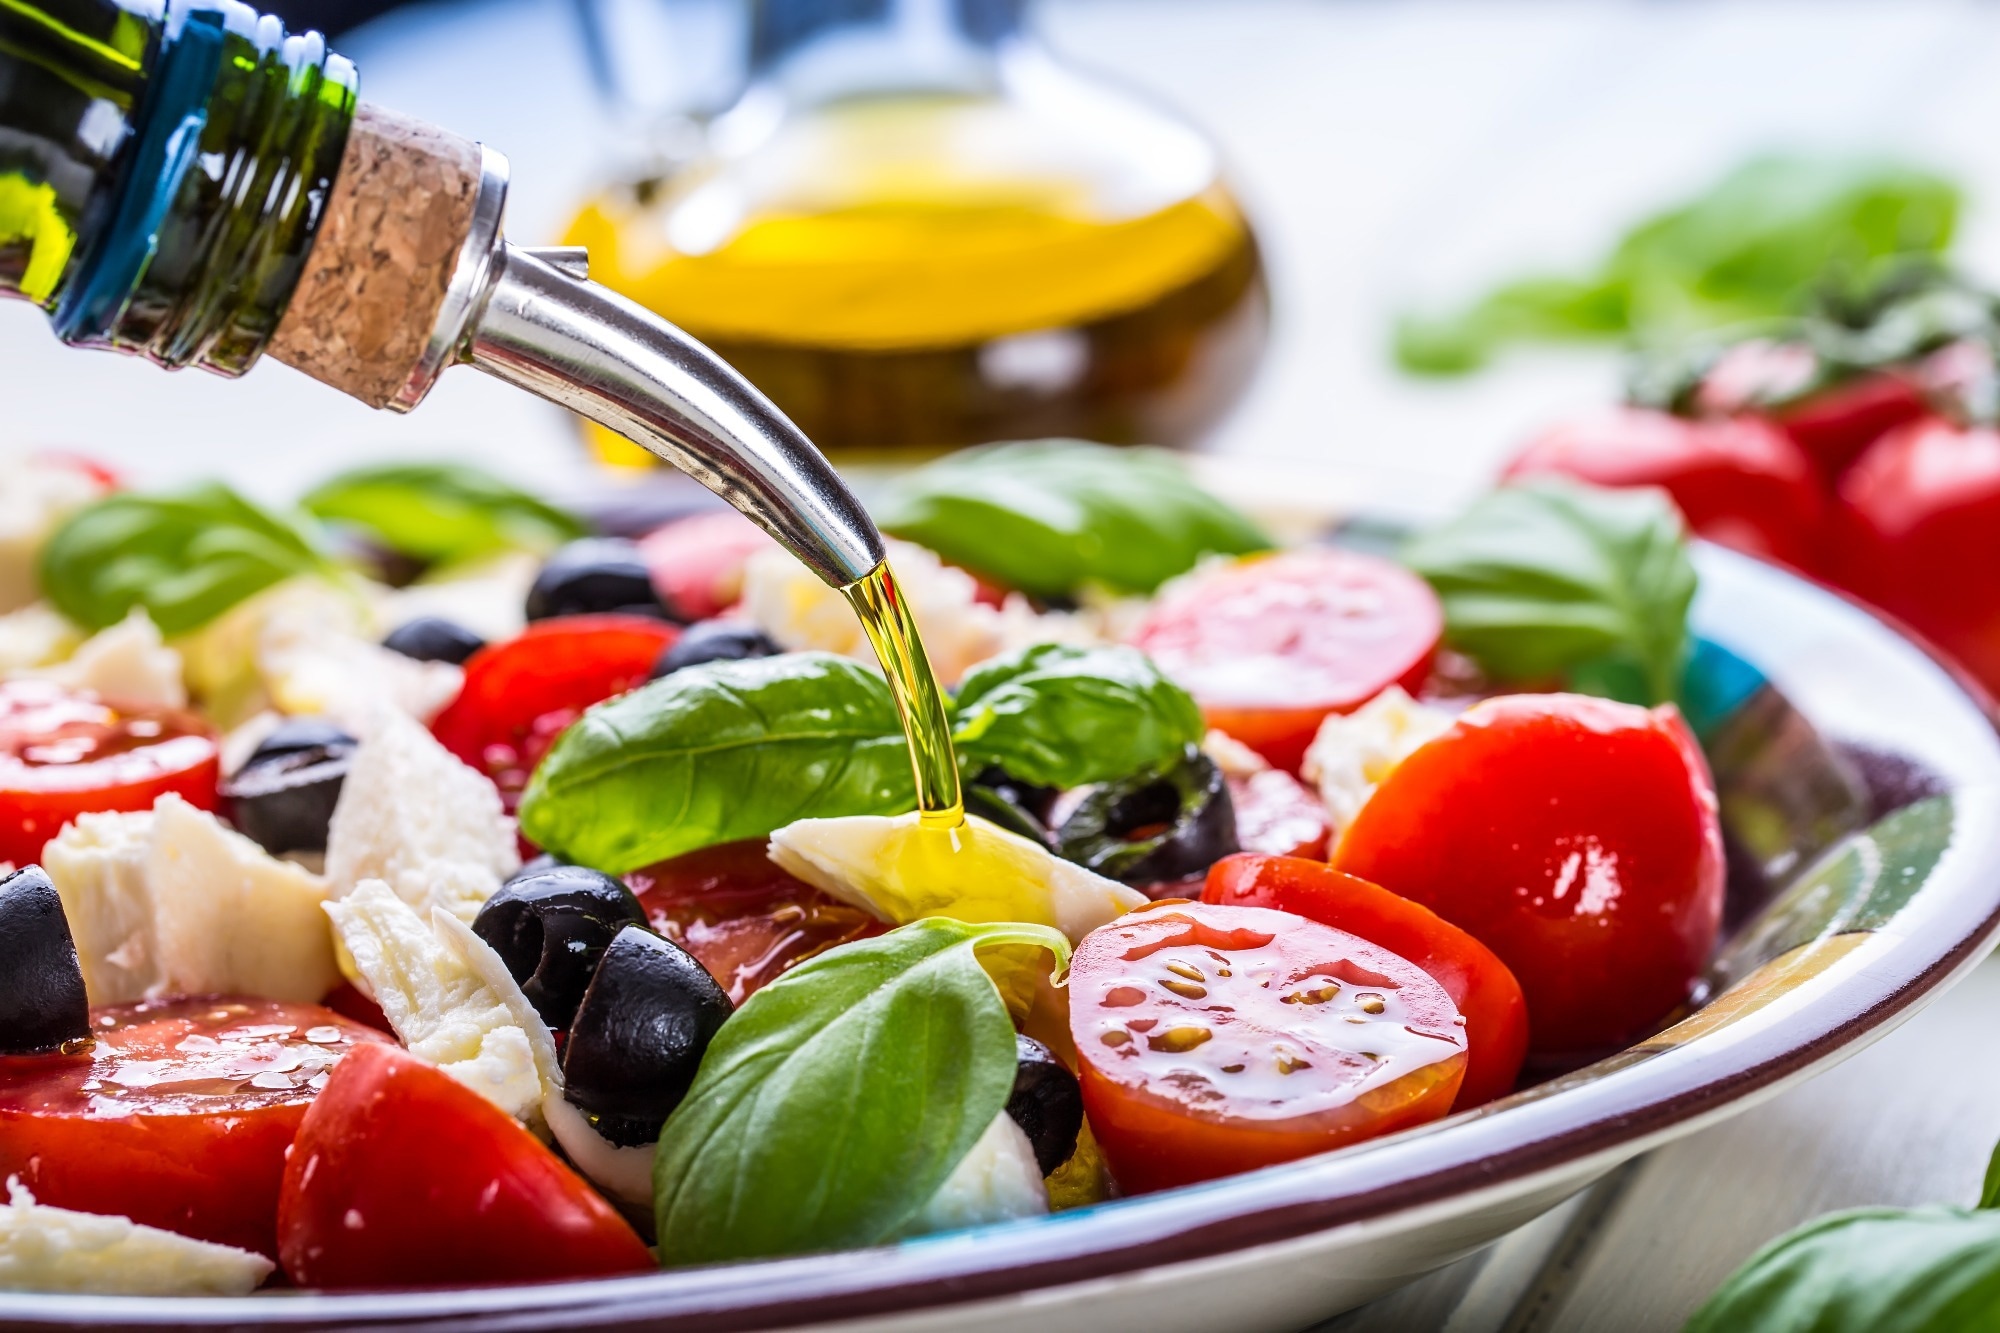 Shifting to vegetarian, Mediterranean, and ketogenic diets improves mood and reduces anxiety